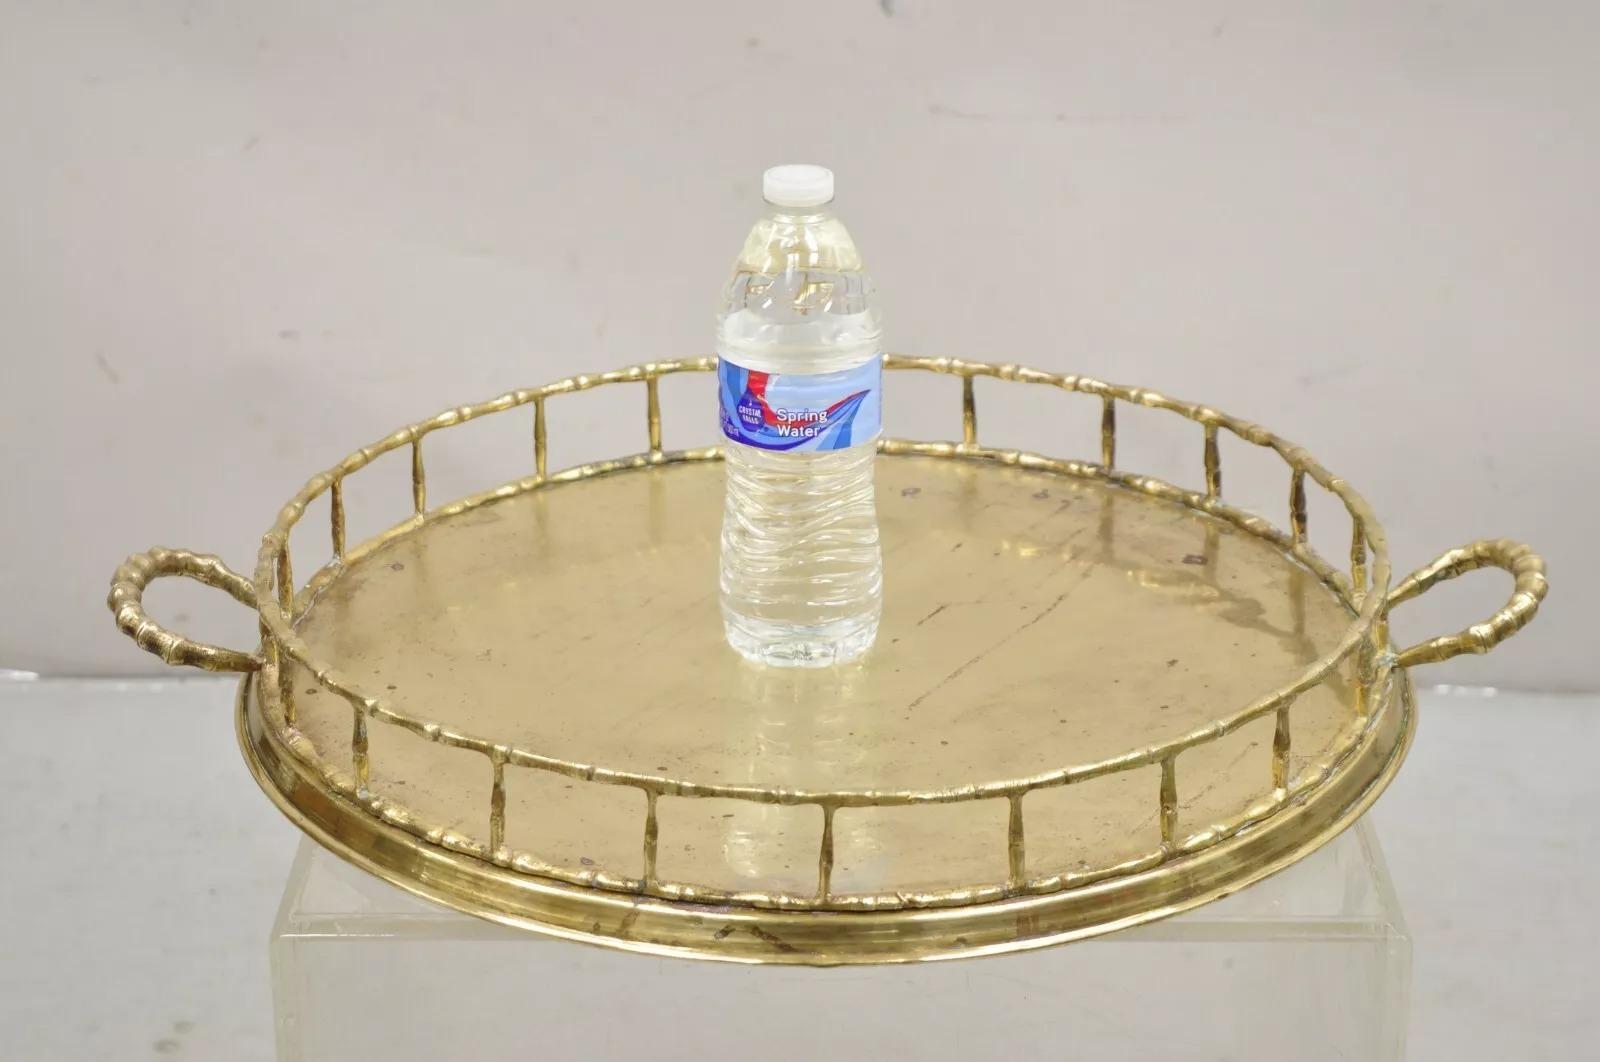 Vintage Hollywood Regency Faux Bamboo Solid Brass Round Serving Platter Tray. Circa Mid 20th Century. Measurements: 3